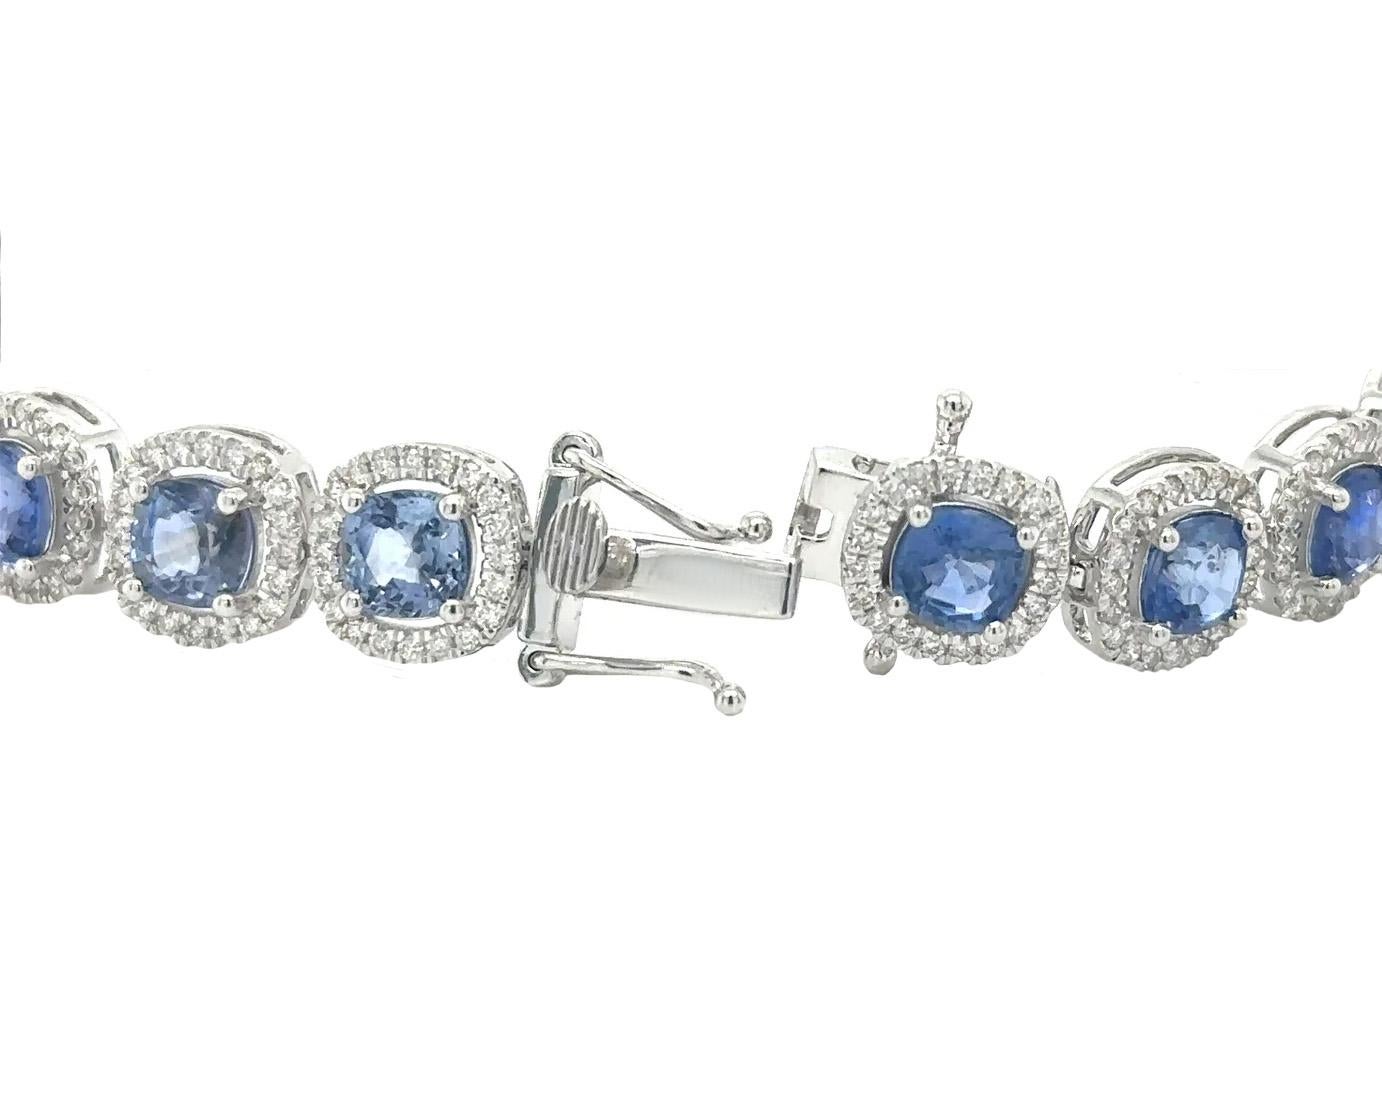 Mixed Cut Sapphire Bracelet With Diamonds 17.36 Carats 14K White Gold For Sale